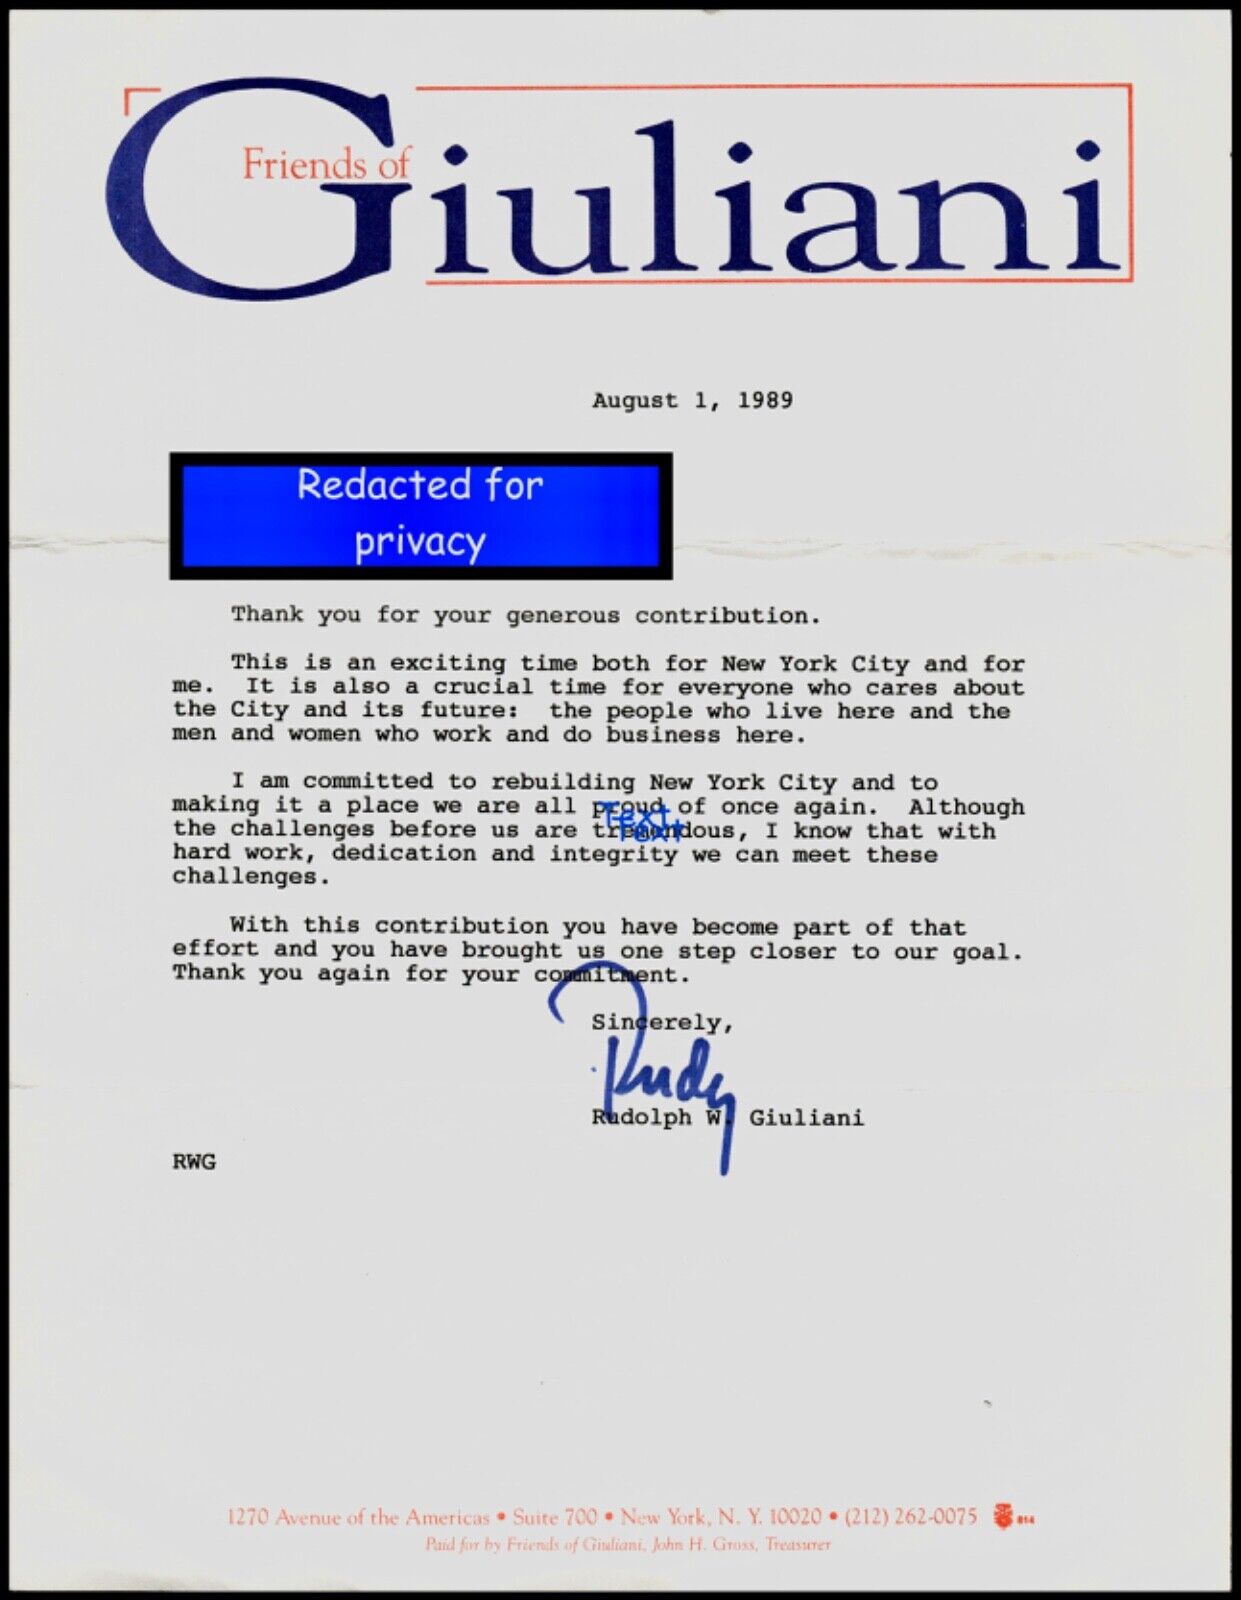 Rudolph Giuliani Signed Letter Friends of Giuliani August 1989